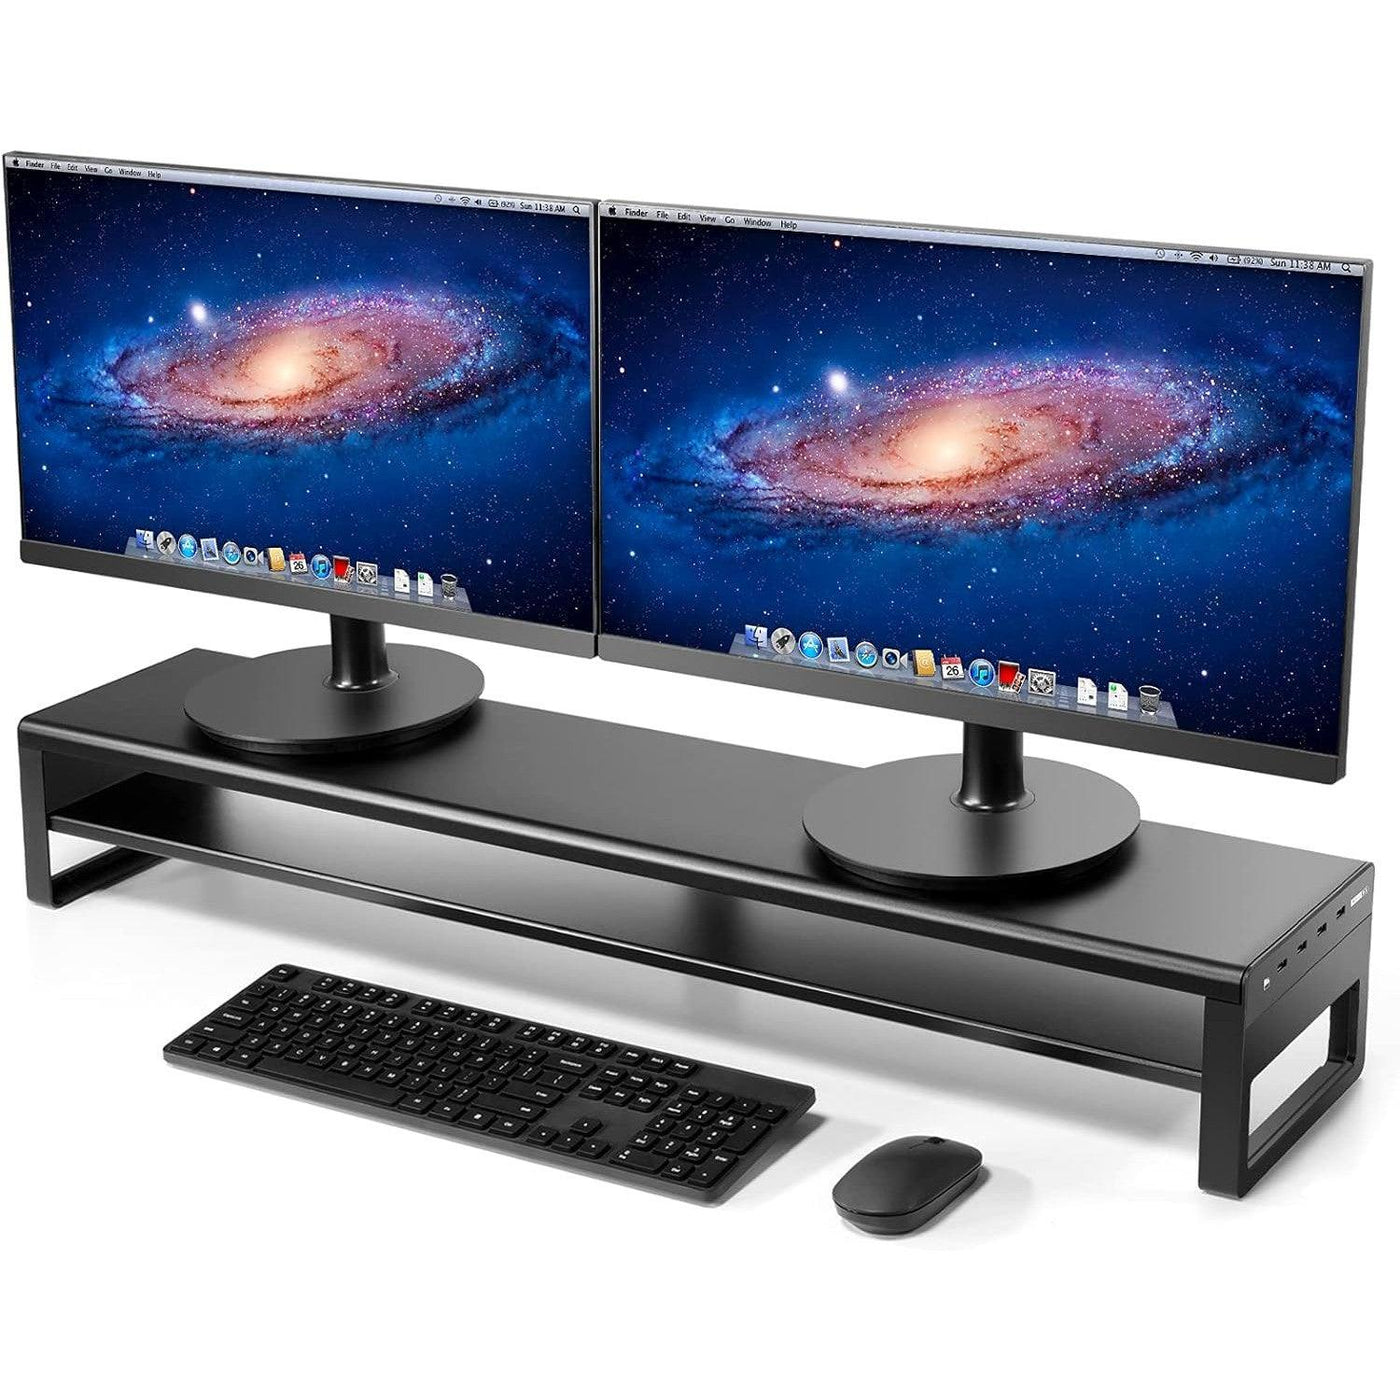 VAYDEER 2 Tiers Dual Monitor Stand with 4 USB 3.0 Ports Hub for Screen - Massive Discounts